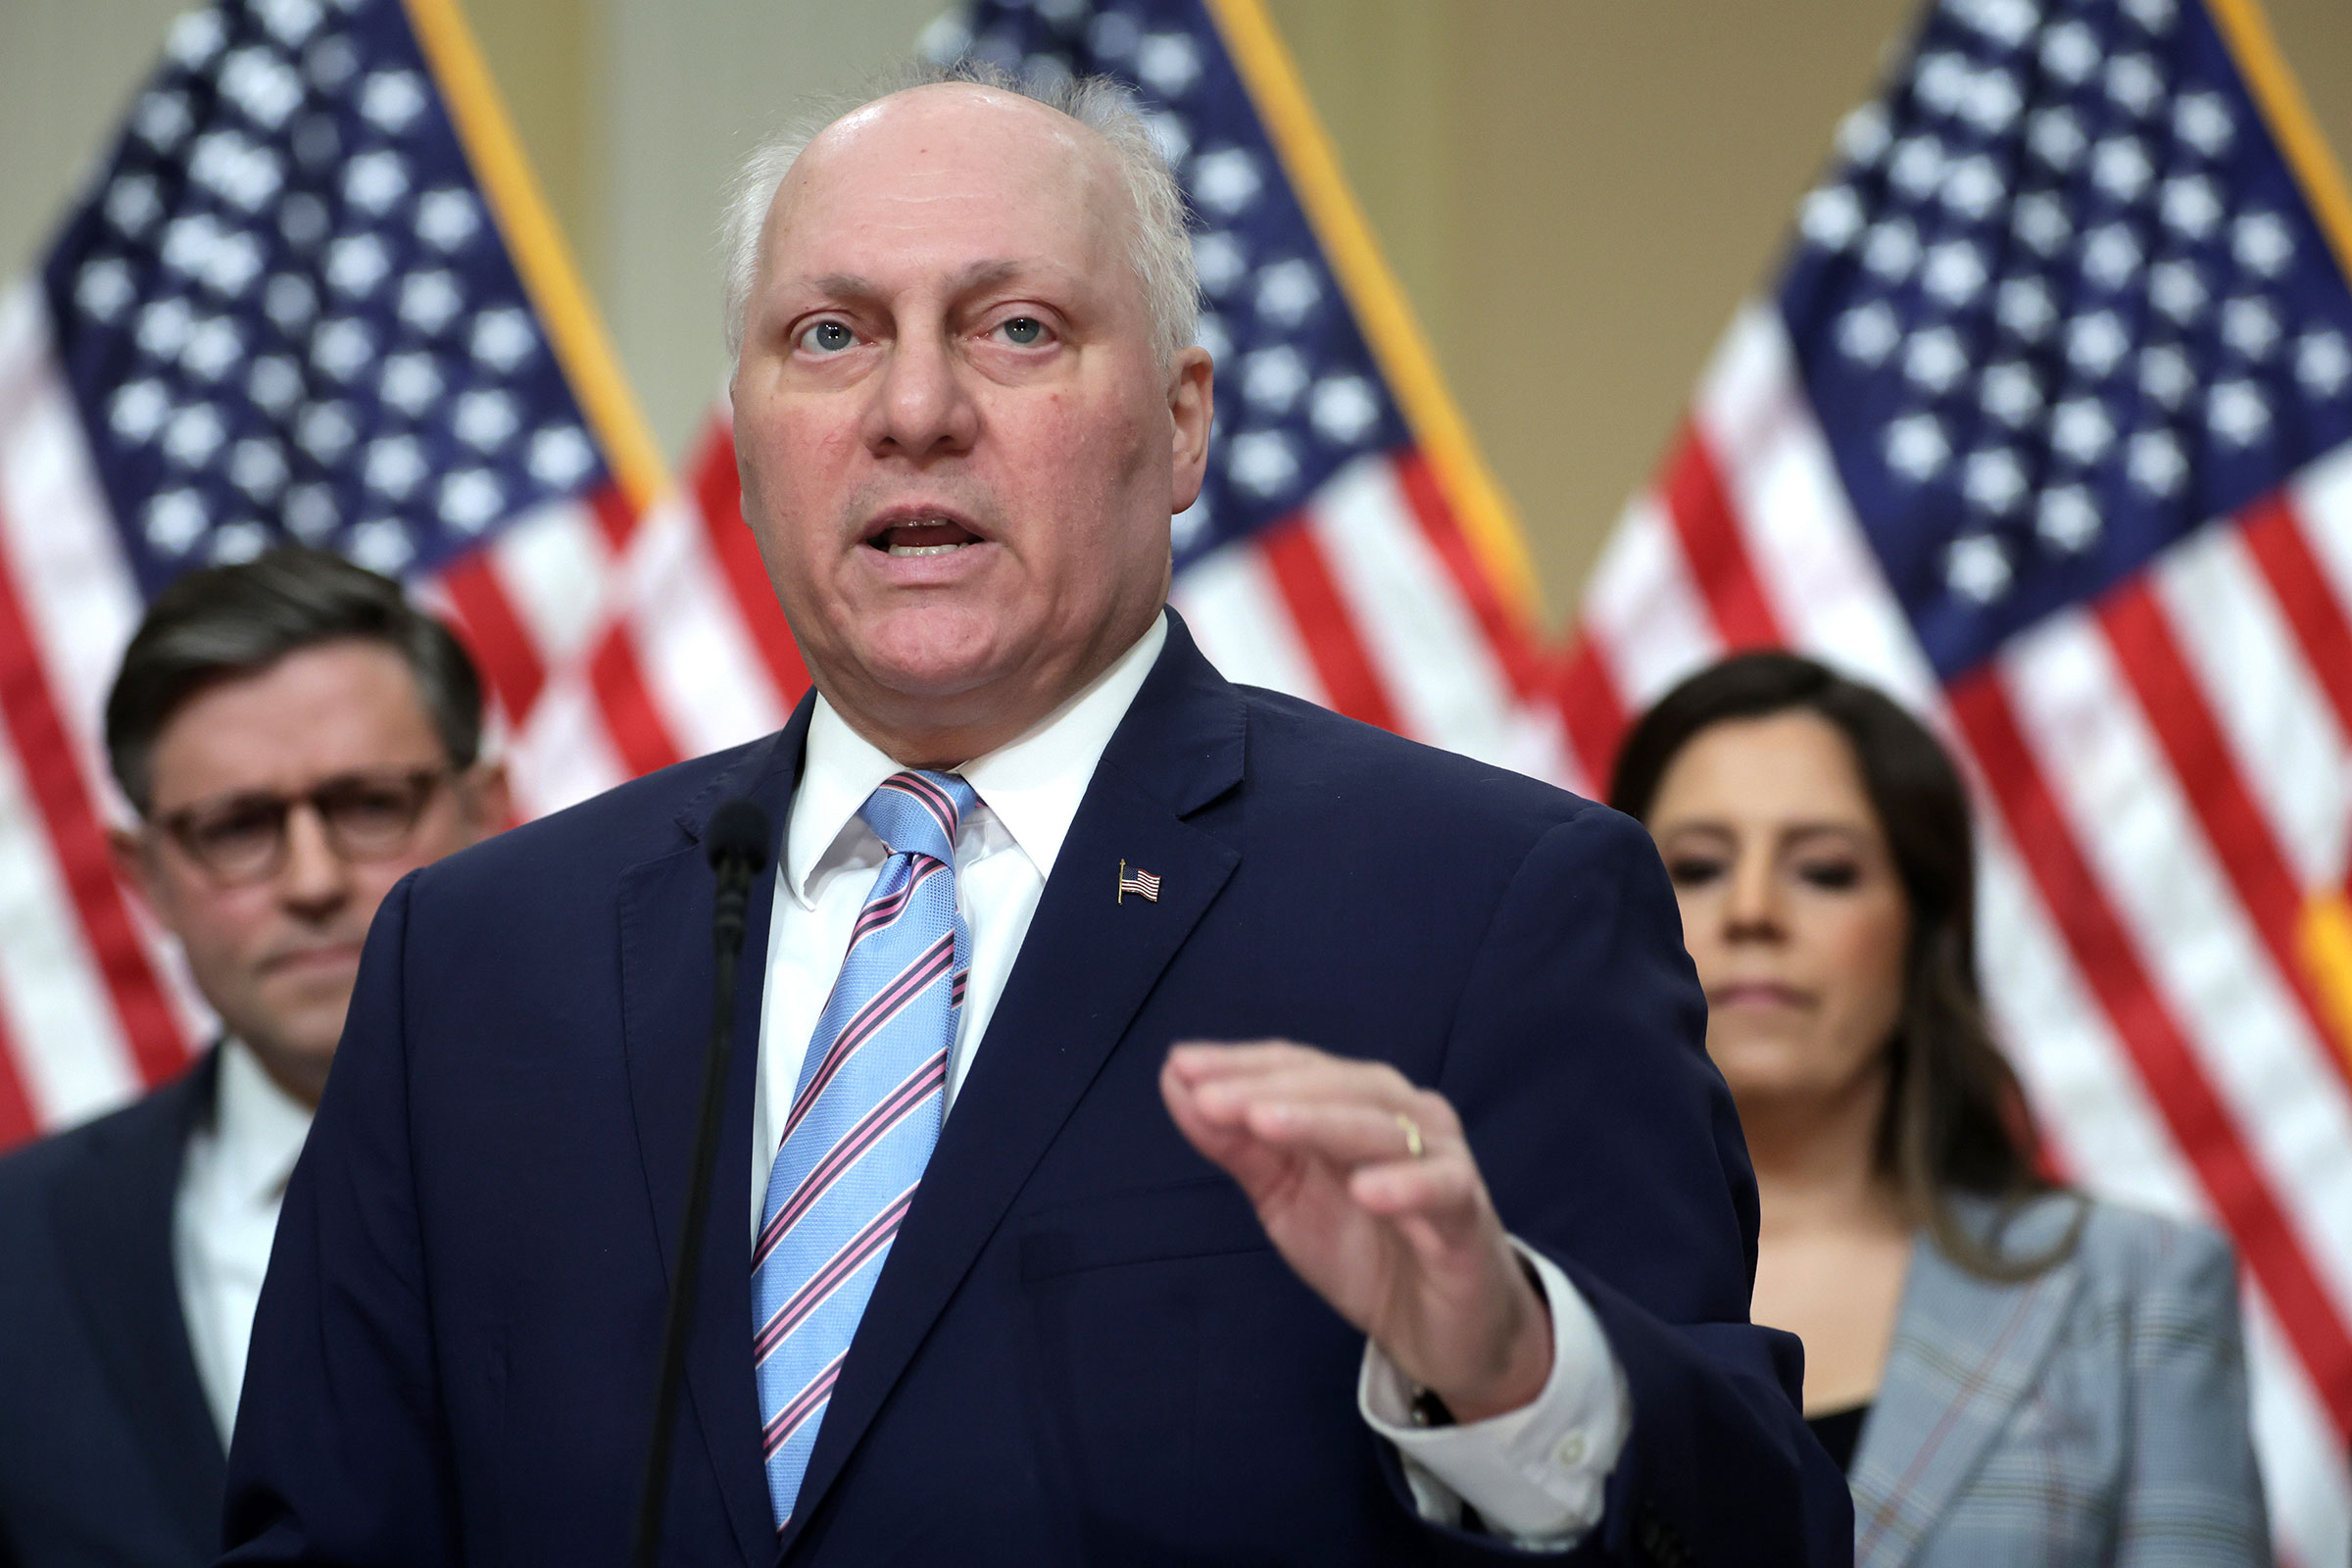 House Majority Leader Rep. Steve Scalise speaks as Speaker of the House Rep. Mike Johnson and Rep. Elise Stefanik listen during a news conference at the Cannon House Office Building on Capitol Hill on March 6 in Washington, DC.